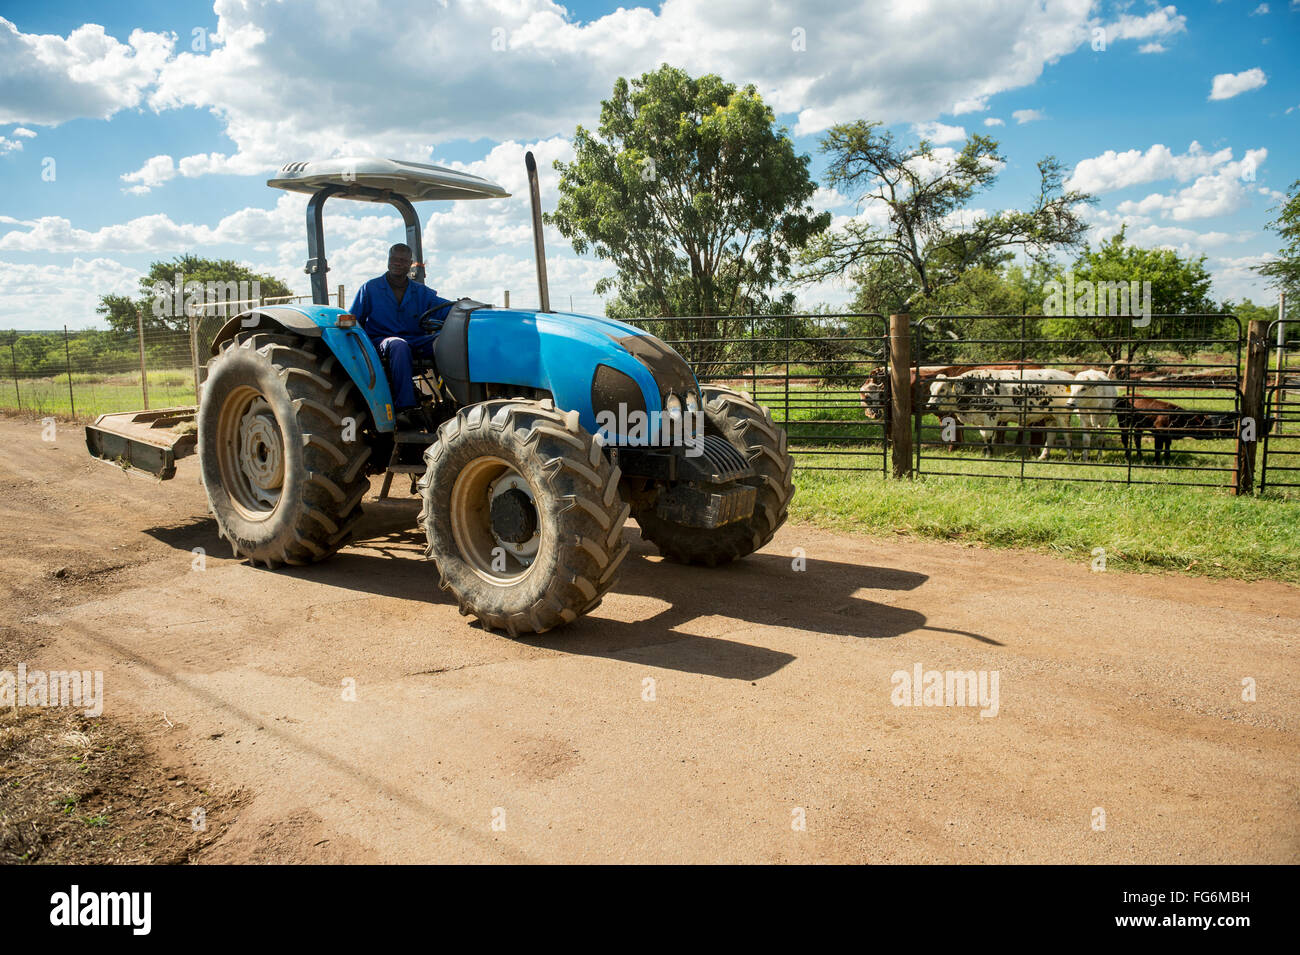 Blue tractor driving past Bonsmara and Nguni cows on farm; Roodeplaat, Gautang, South Africa Stock Photo